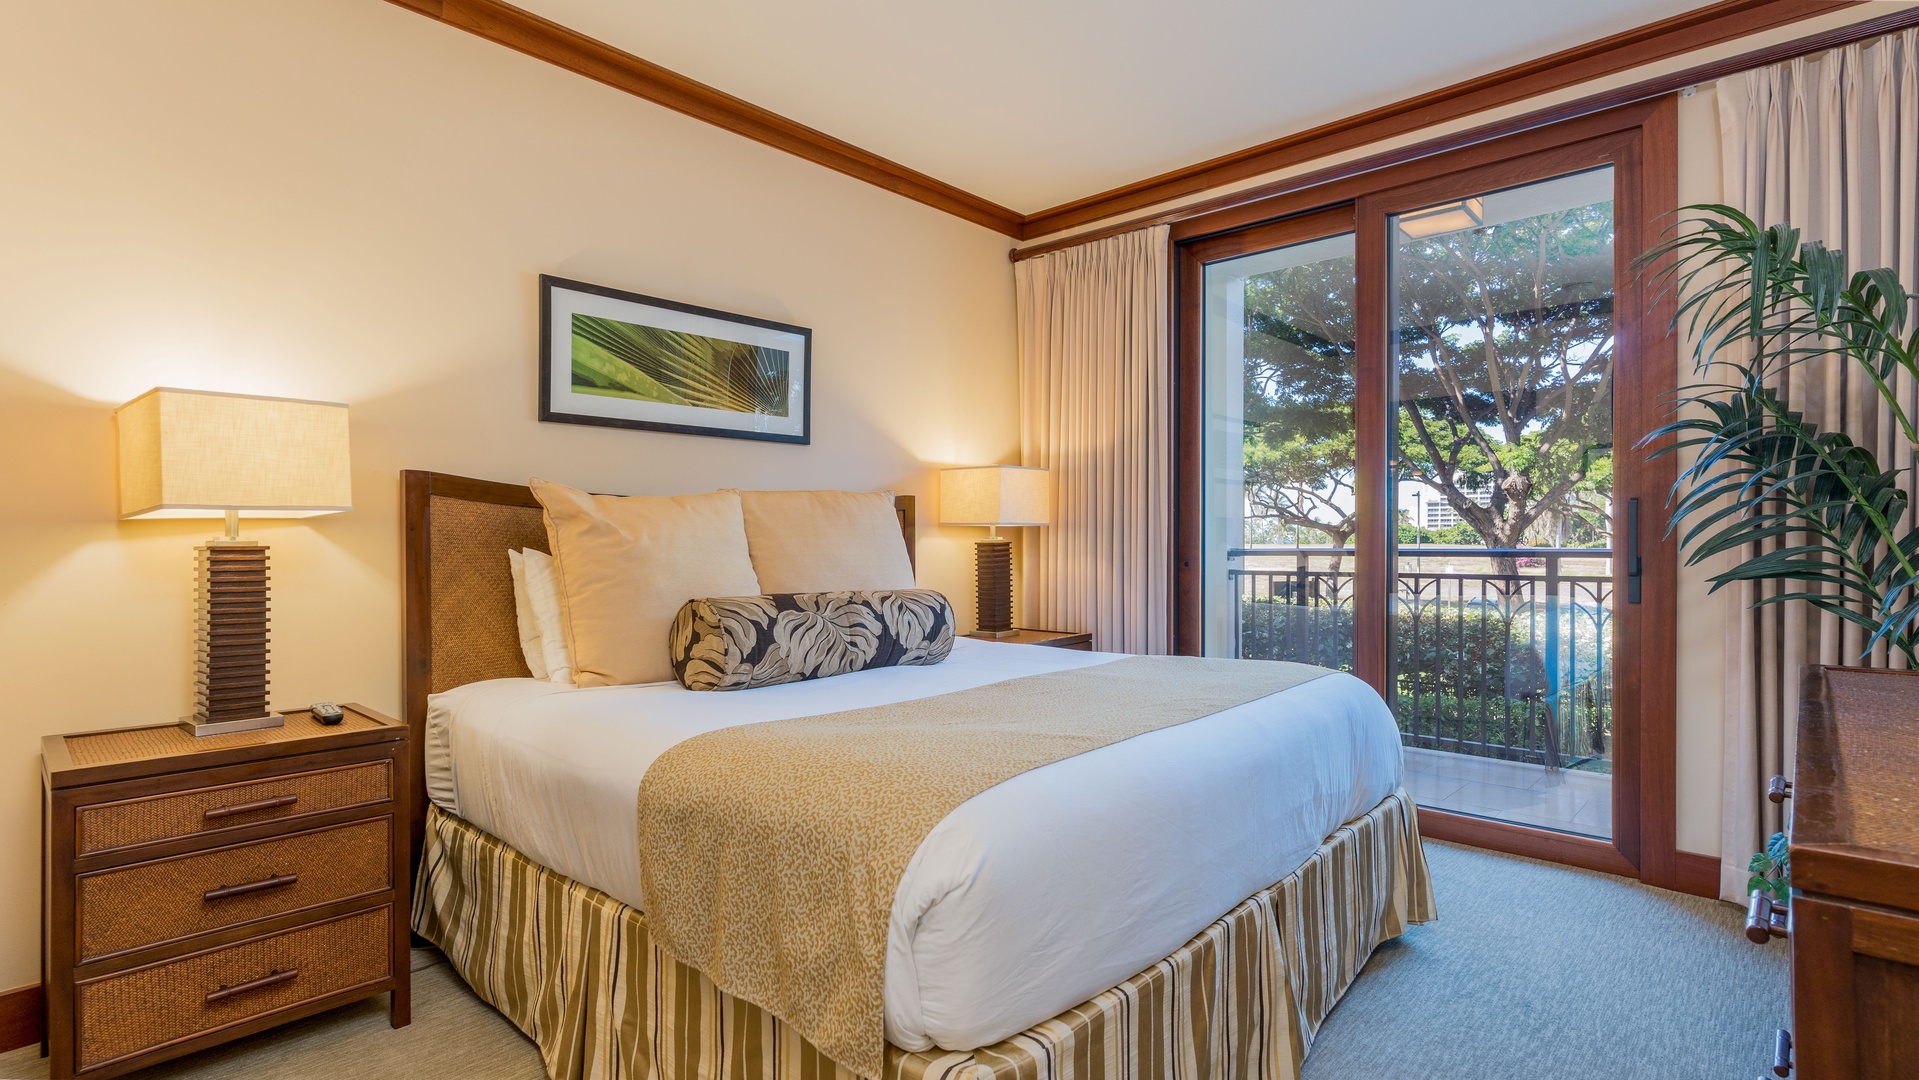 Kapolei Vacation Rentals, Ko Olina Beach Villas B202 - The primary guest bedroom with comfortable decor and breathtaking views when you wake up.